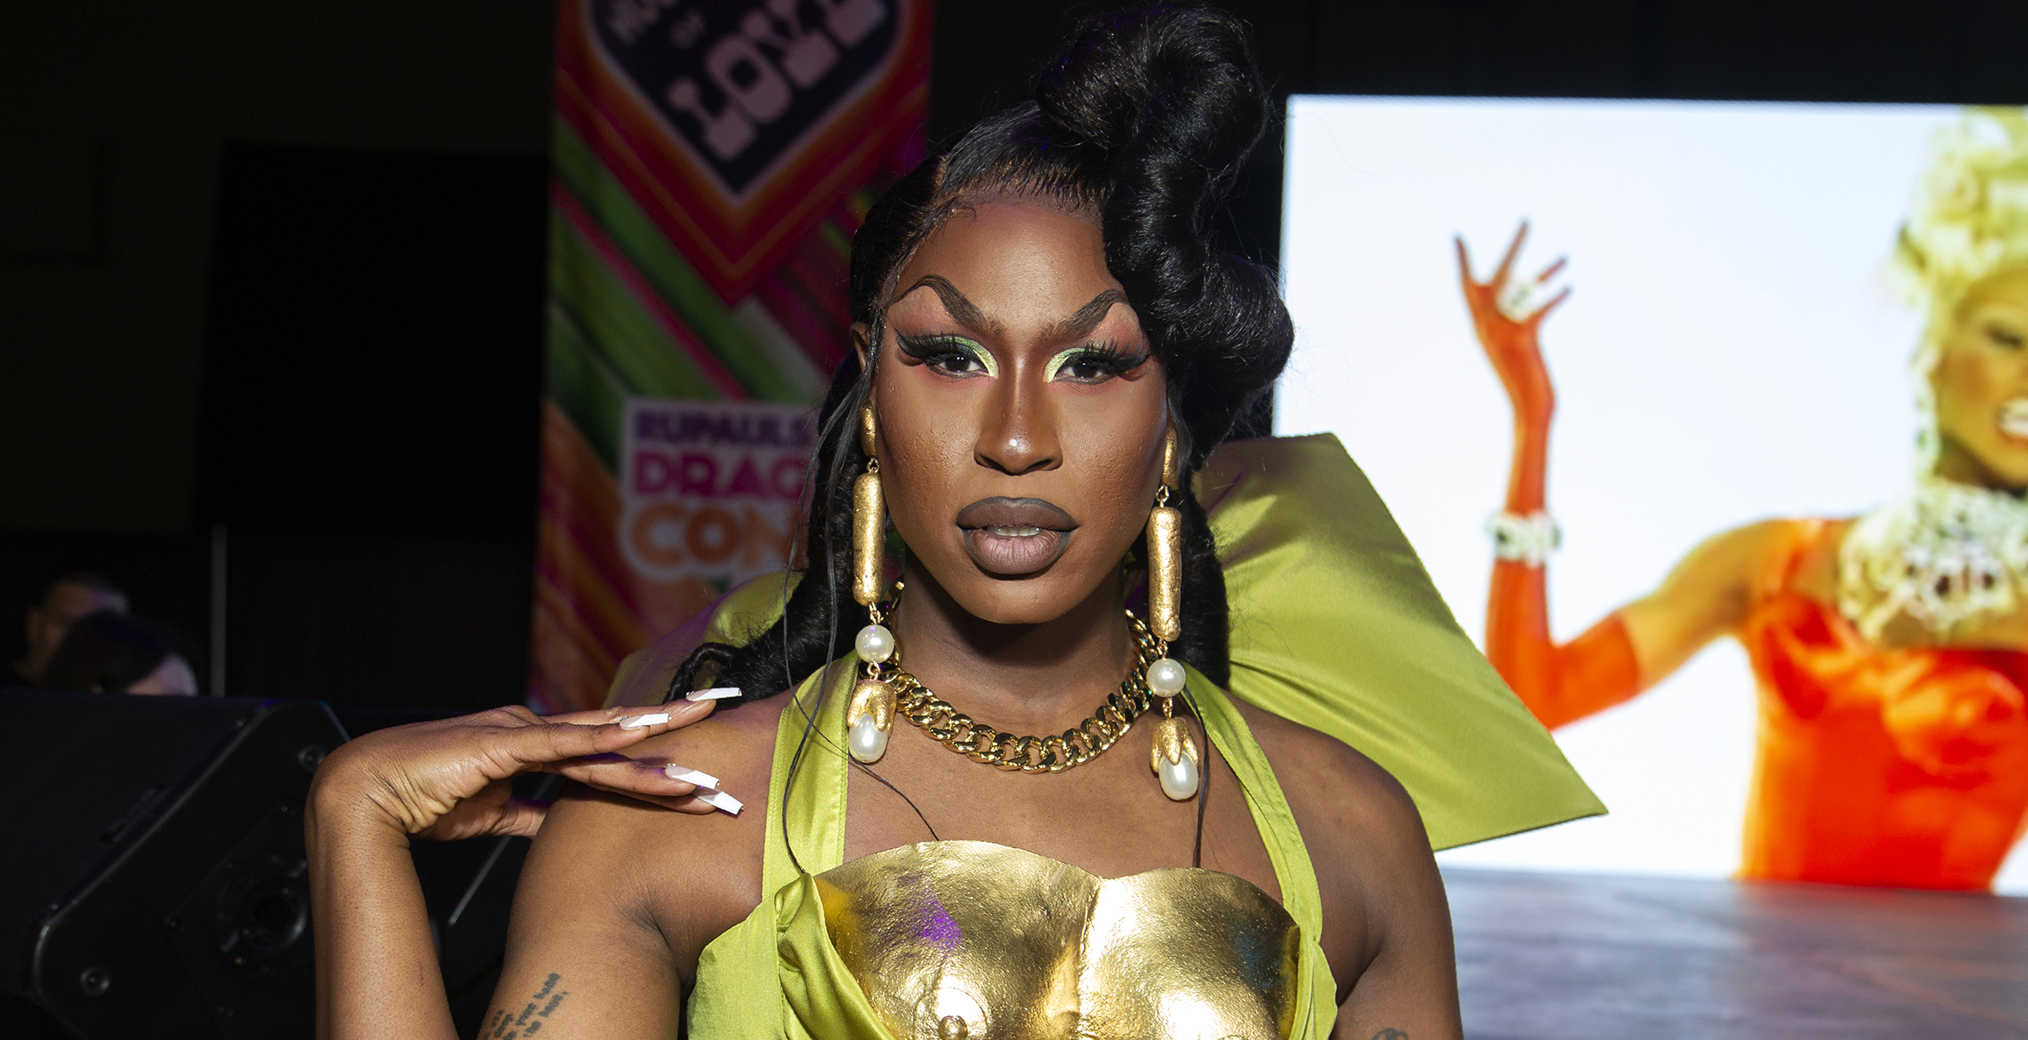 Video 'Not going anywhere': Drag queen Shea Couleé on new music